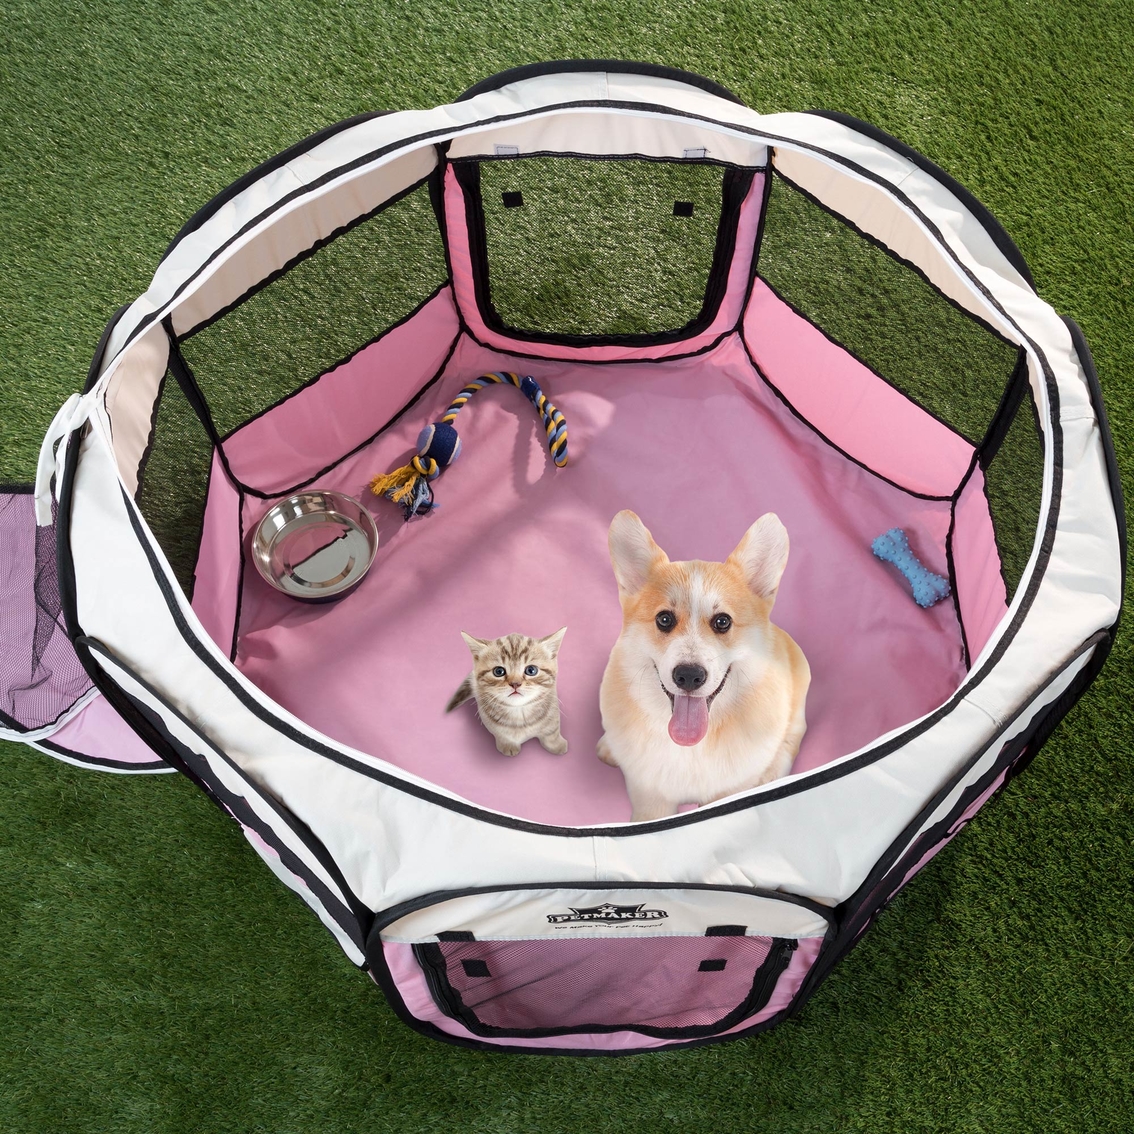 PETMAKER Portable Pop Up Pet Play Pen With Carrying Bag - Image 2 of 7